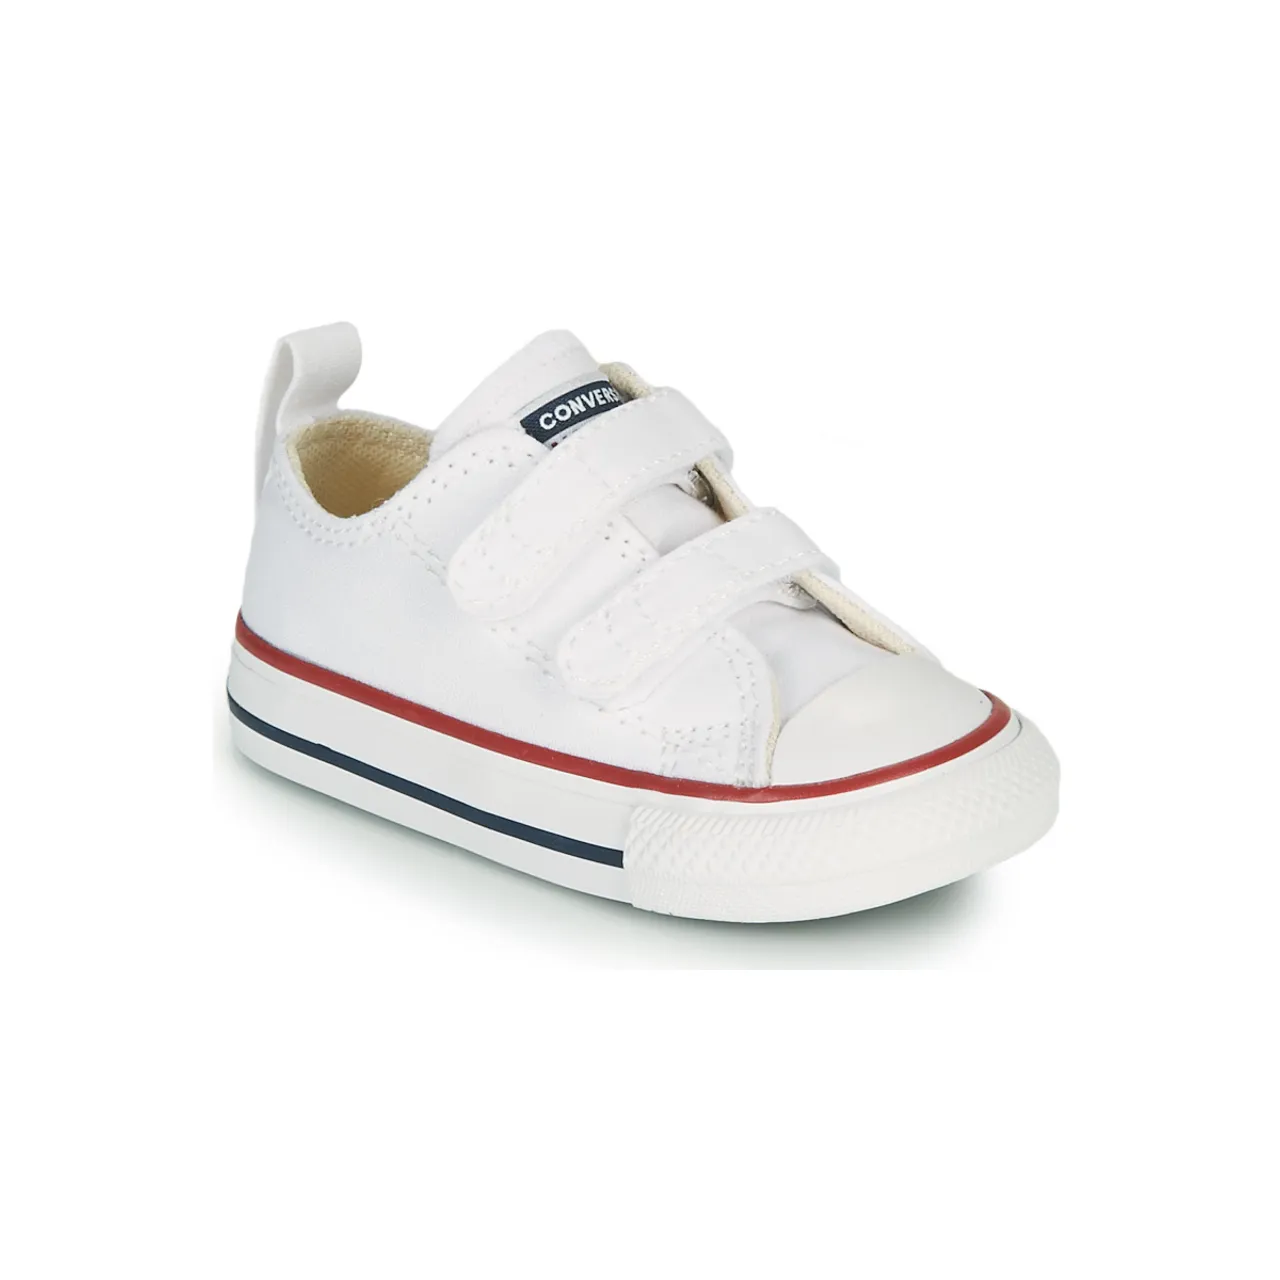 Converse  CHUCK TAYLOR ALL STAR 2V FOUNDATION OX  boys's Children's Shoes (Trainers) in White